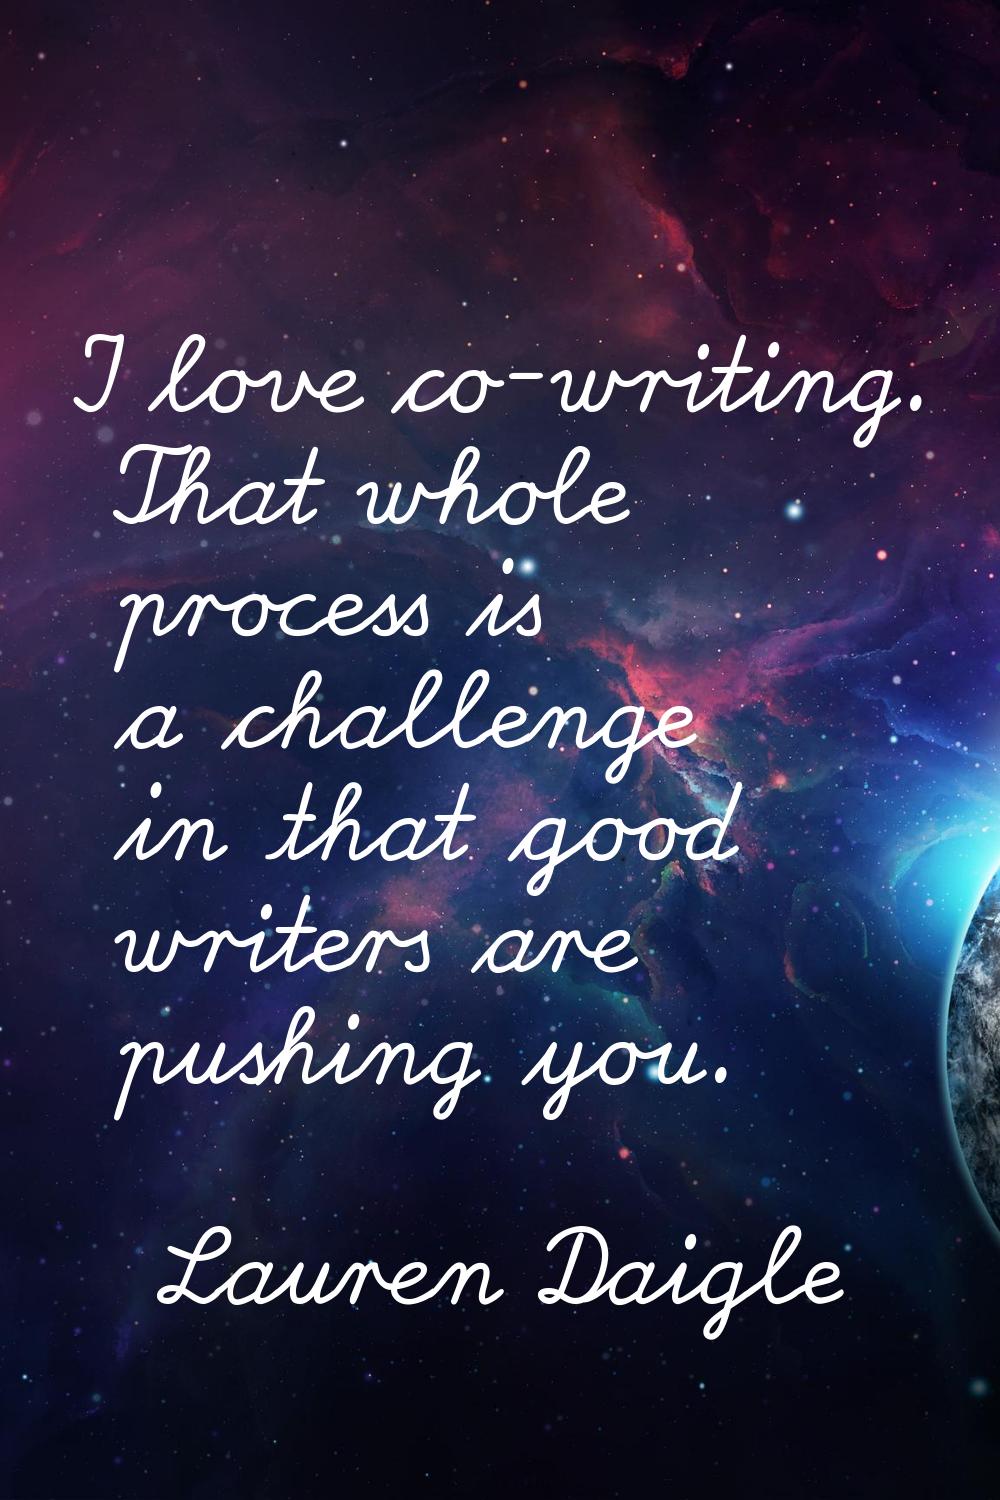 I love co-writing. That whole process is a challenge in that good writers are pushing you.